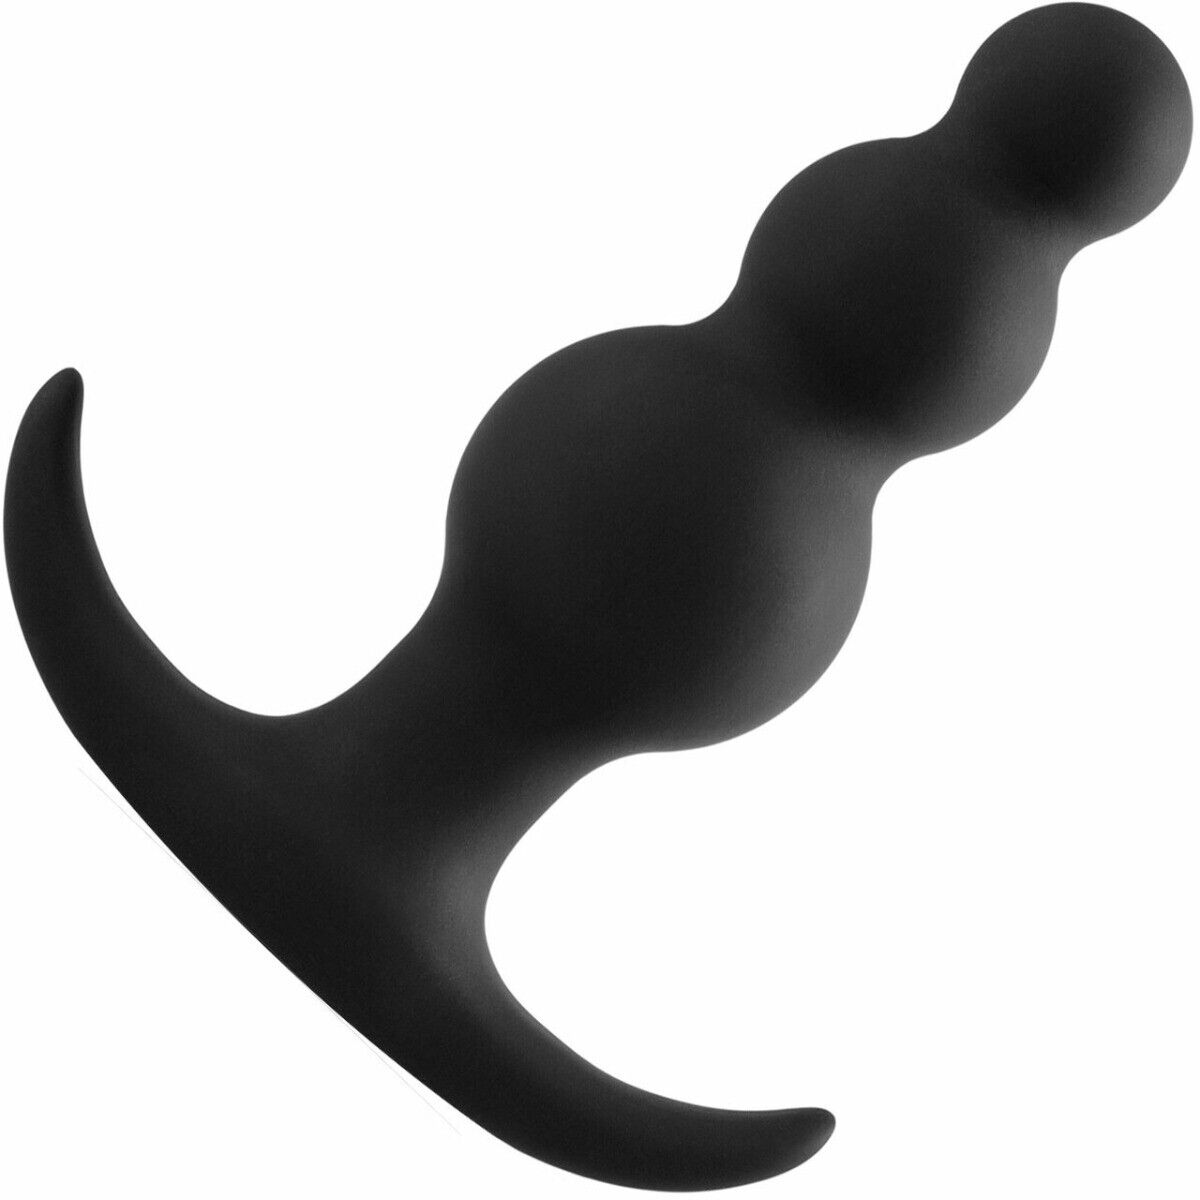 Beaded Silicone Anal Butt Plug Male Prostate Massager Anal Play Sex Toys